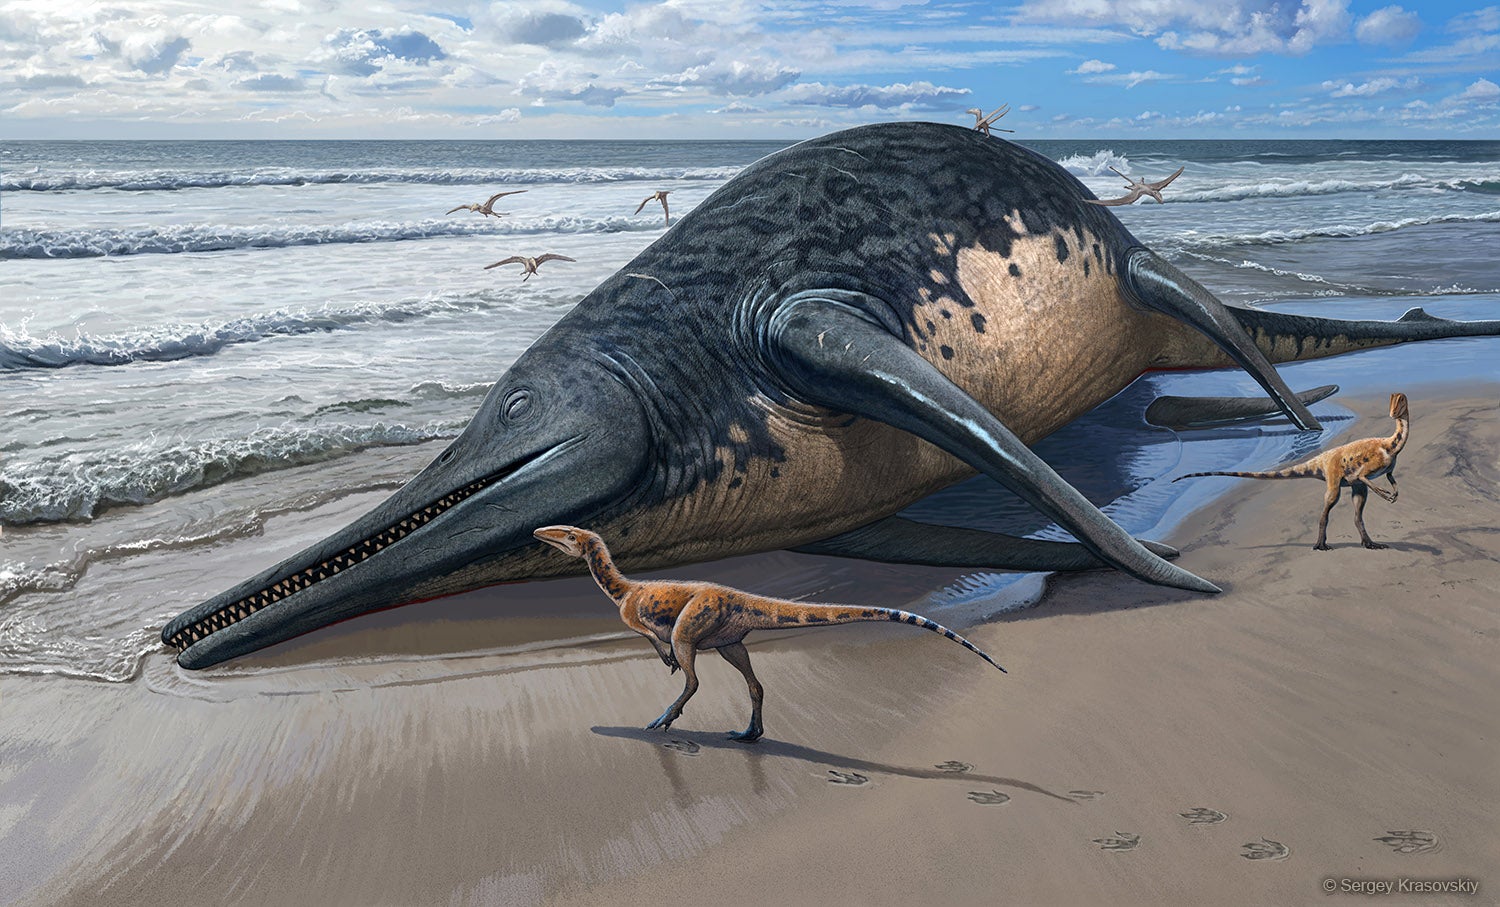 scientists identify what may be the largest known marine reptile